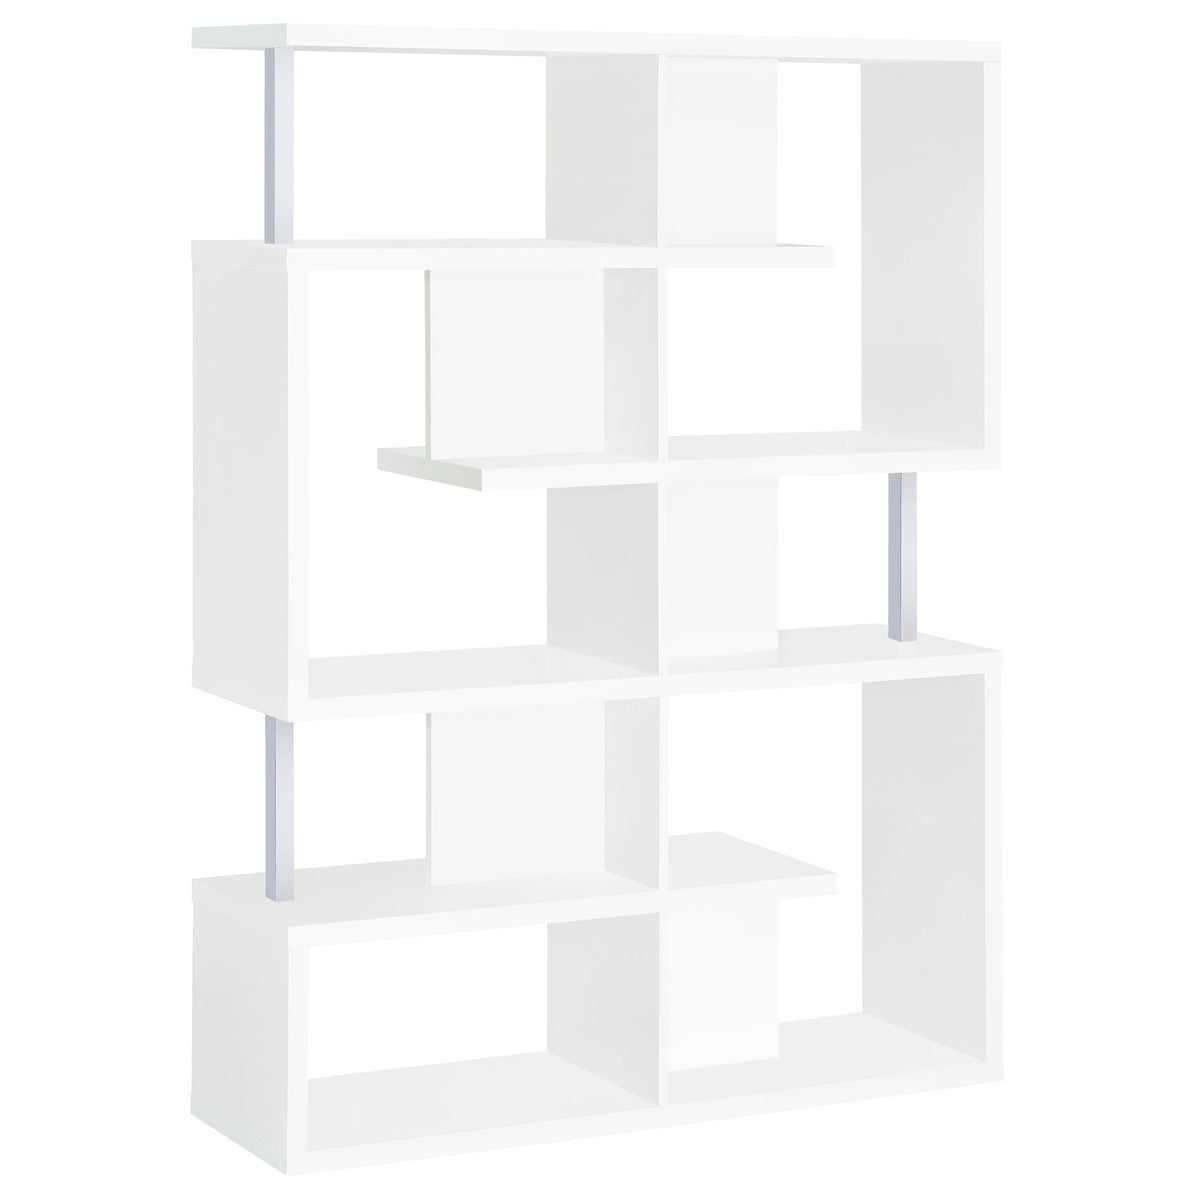 Hoover 5-tier Bookcase White and Chrome  Las Vegas Furniture Stores